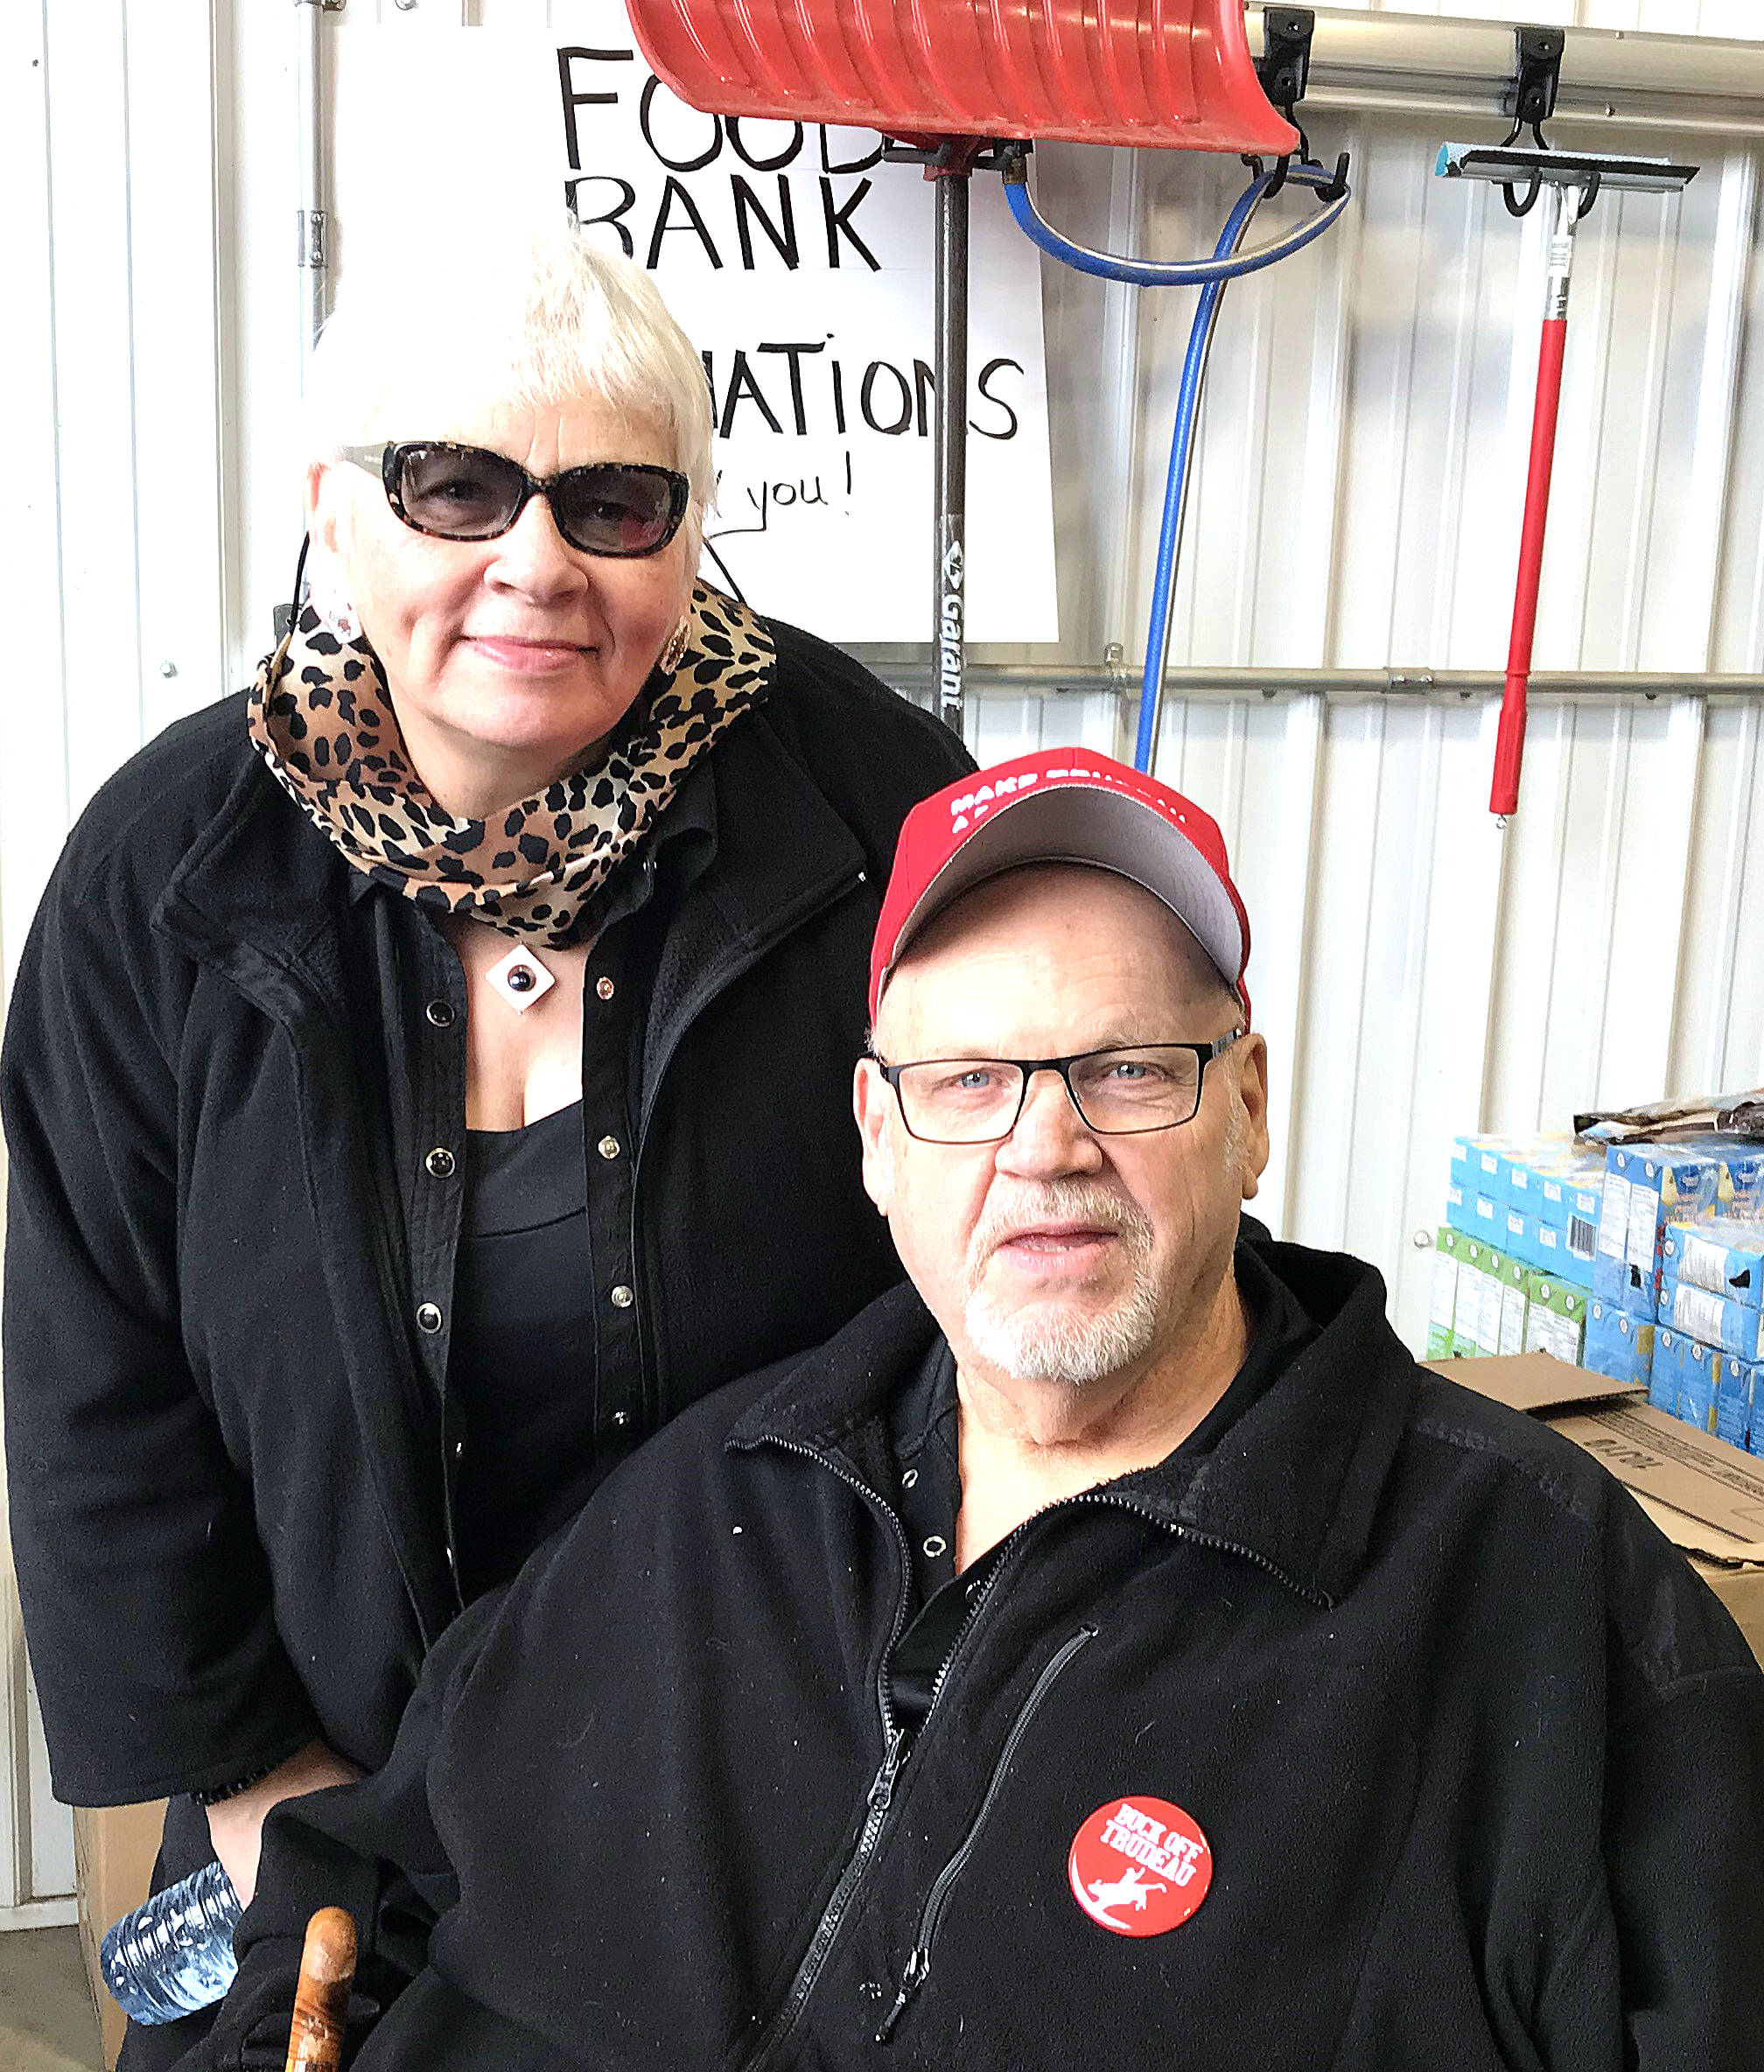 Sarah George-Skolly and John Skolly came from Blackfalds to participate in the Heartland Rally in Stettler to show support for the oil and gas industry Jan. 26. (Lisa Joy/Stettler Independent)